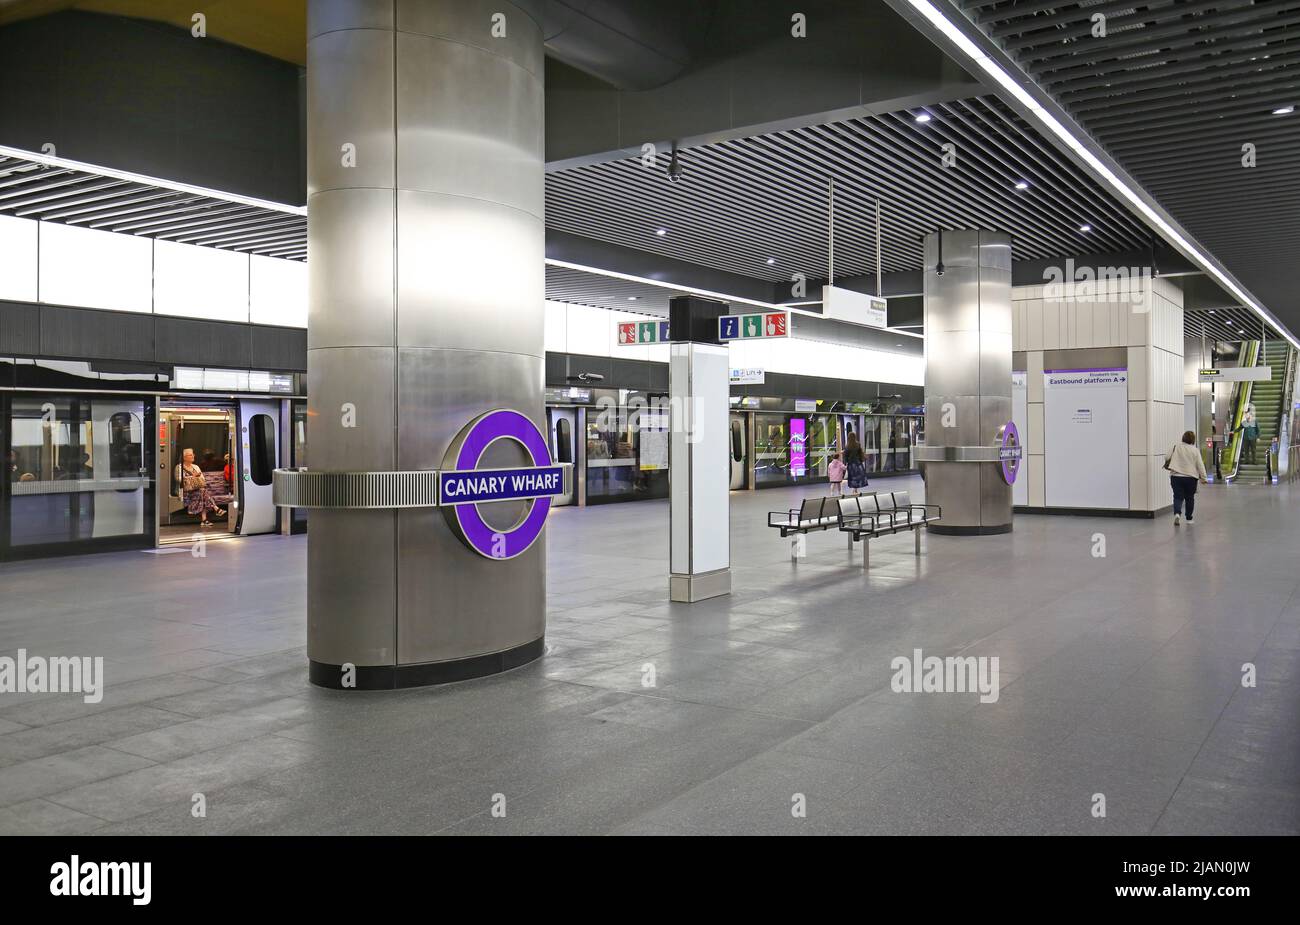 London, UK. The newly opened Elizabeth Line (Crossrail) station at Canary Wharf. Platform level view, shows train awaiting depature. Stock Photo